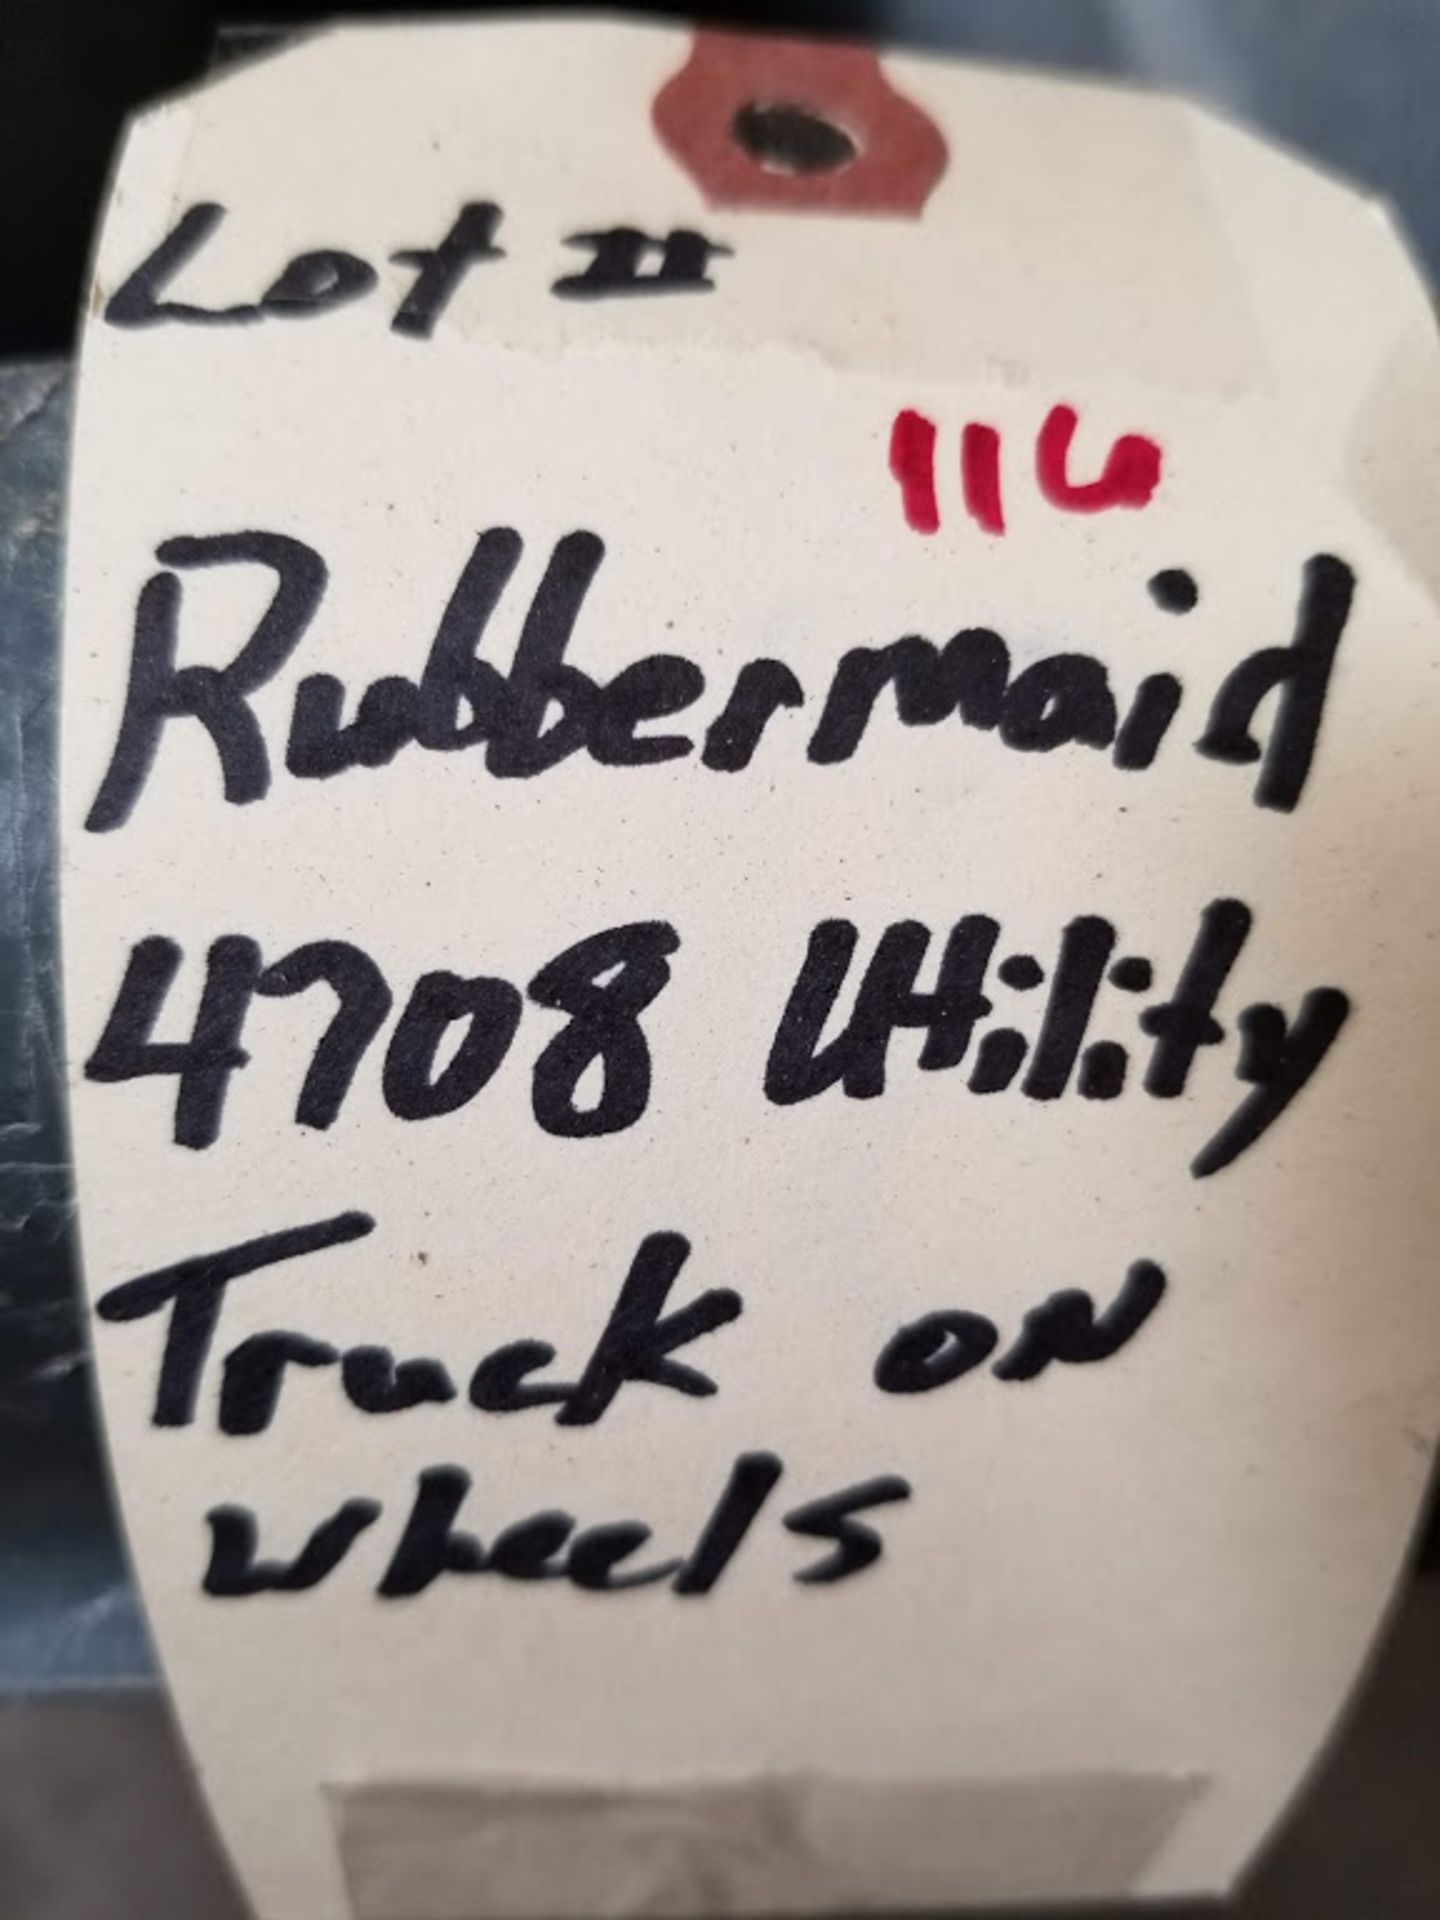 Rubbermaid 4708 Utility Truck (On Wheels) - Image 3 of 3